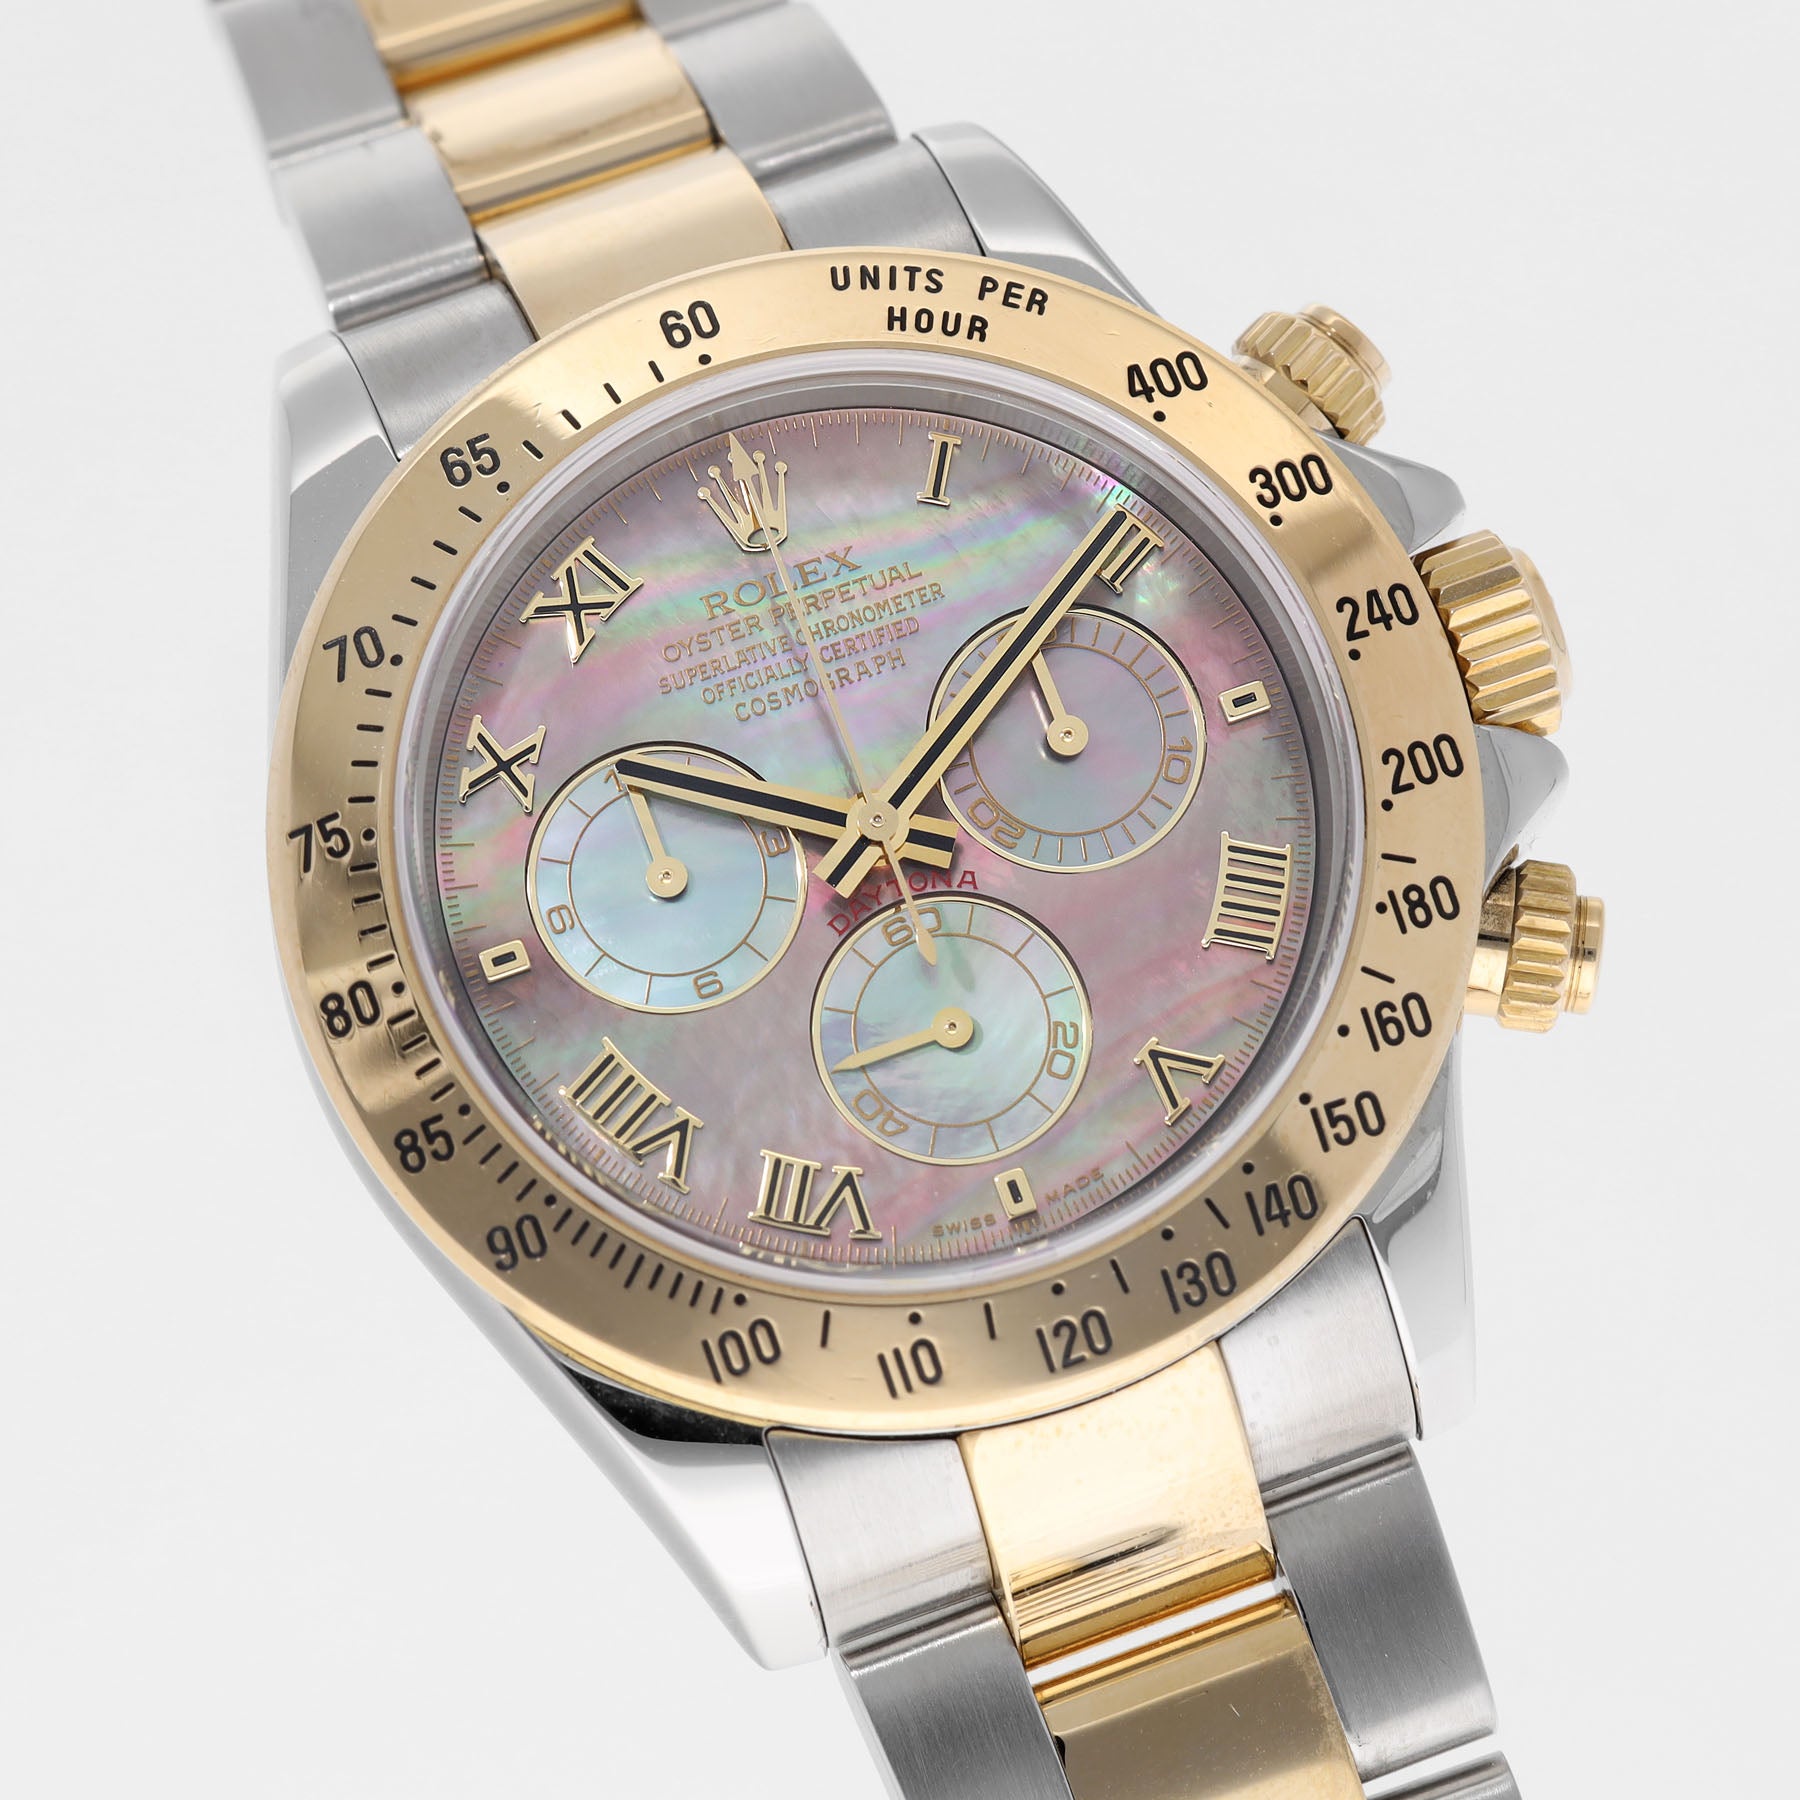 Rolex Daytona Mother of Pearl Dial Ref 116523